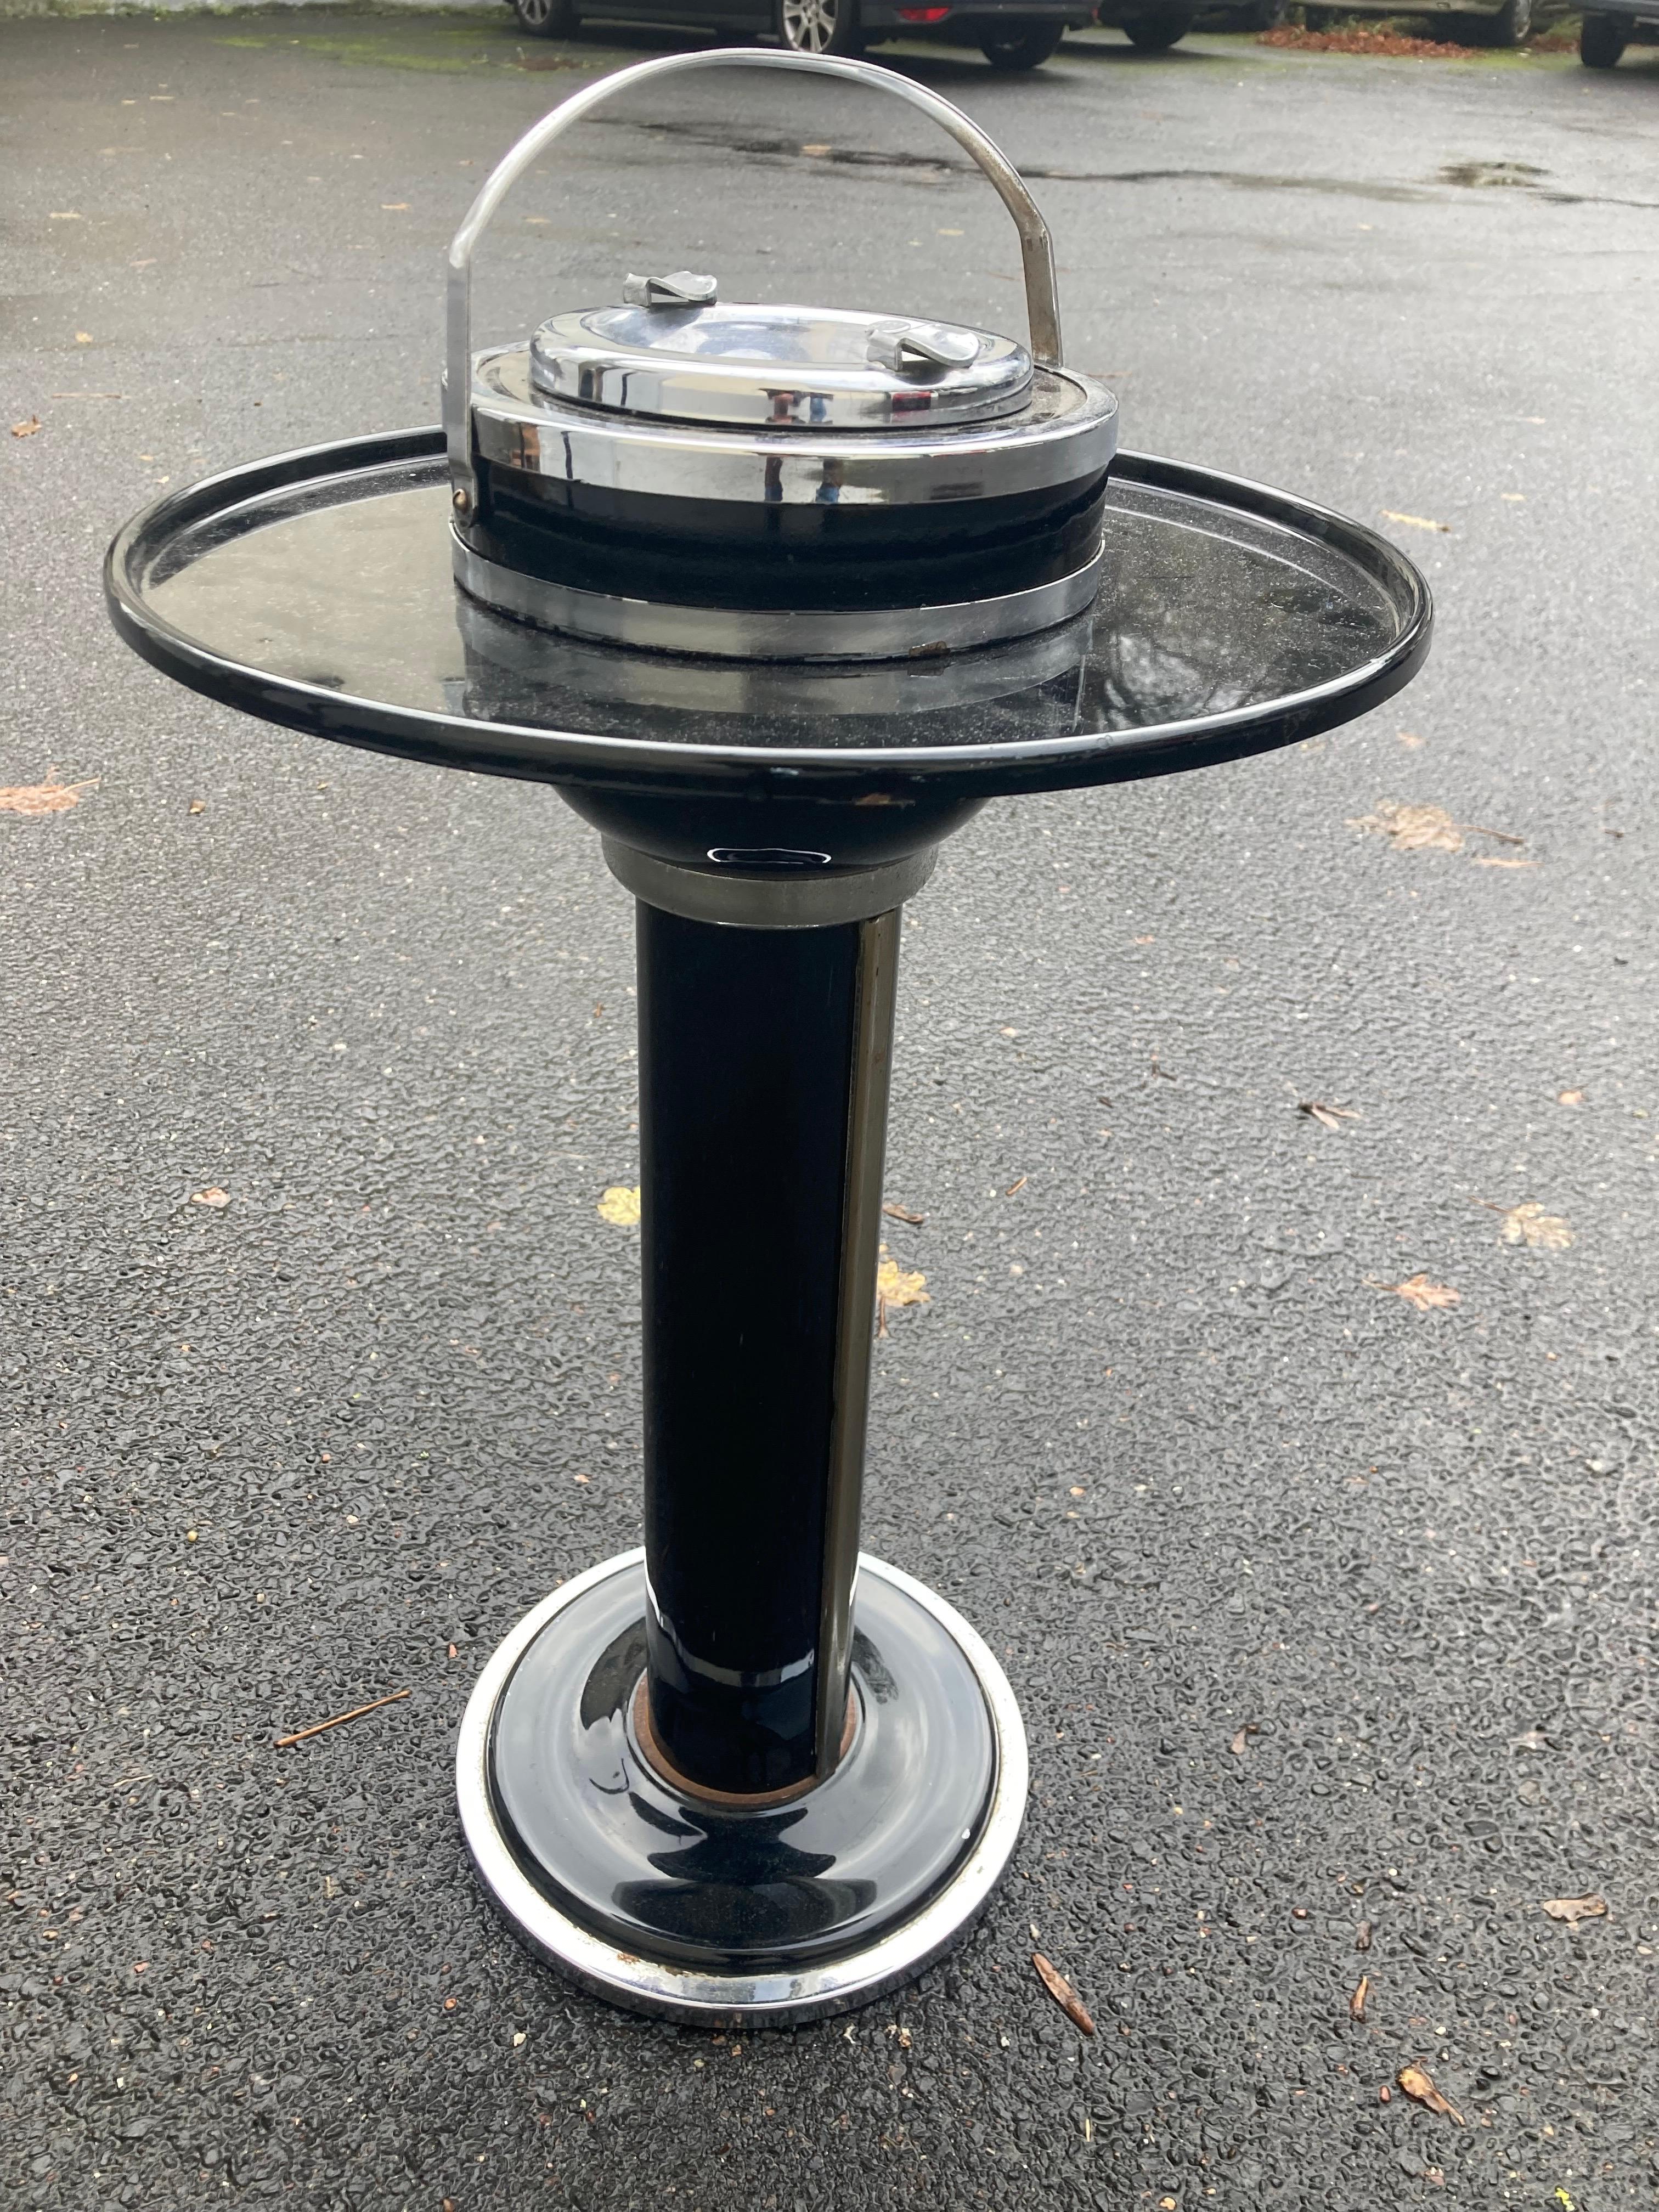 Very rare Modernist American Art Déco smoking table/ standing ashtray in the style of Walter von Nessen. The chase.
Machine Age. 1930s.
Chrome plated steel. Black lacquer finish.
Spherical retractable axle cup in black lacquered metal.
The folding